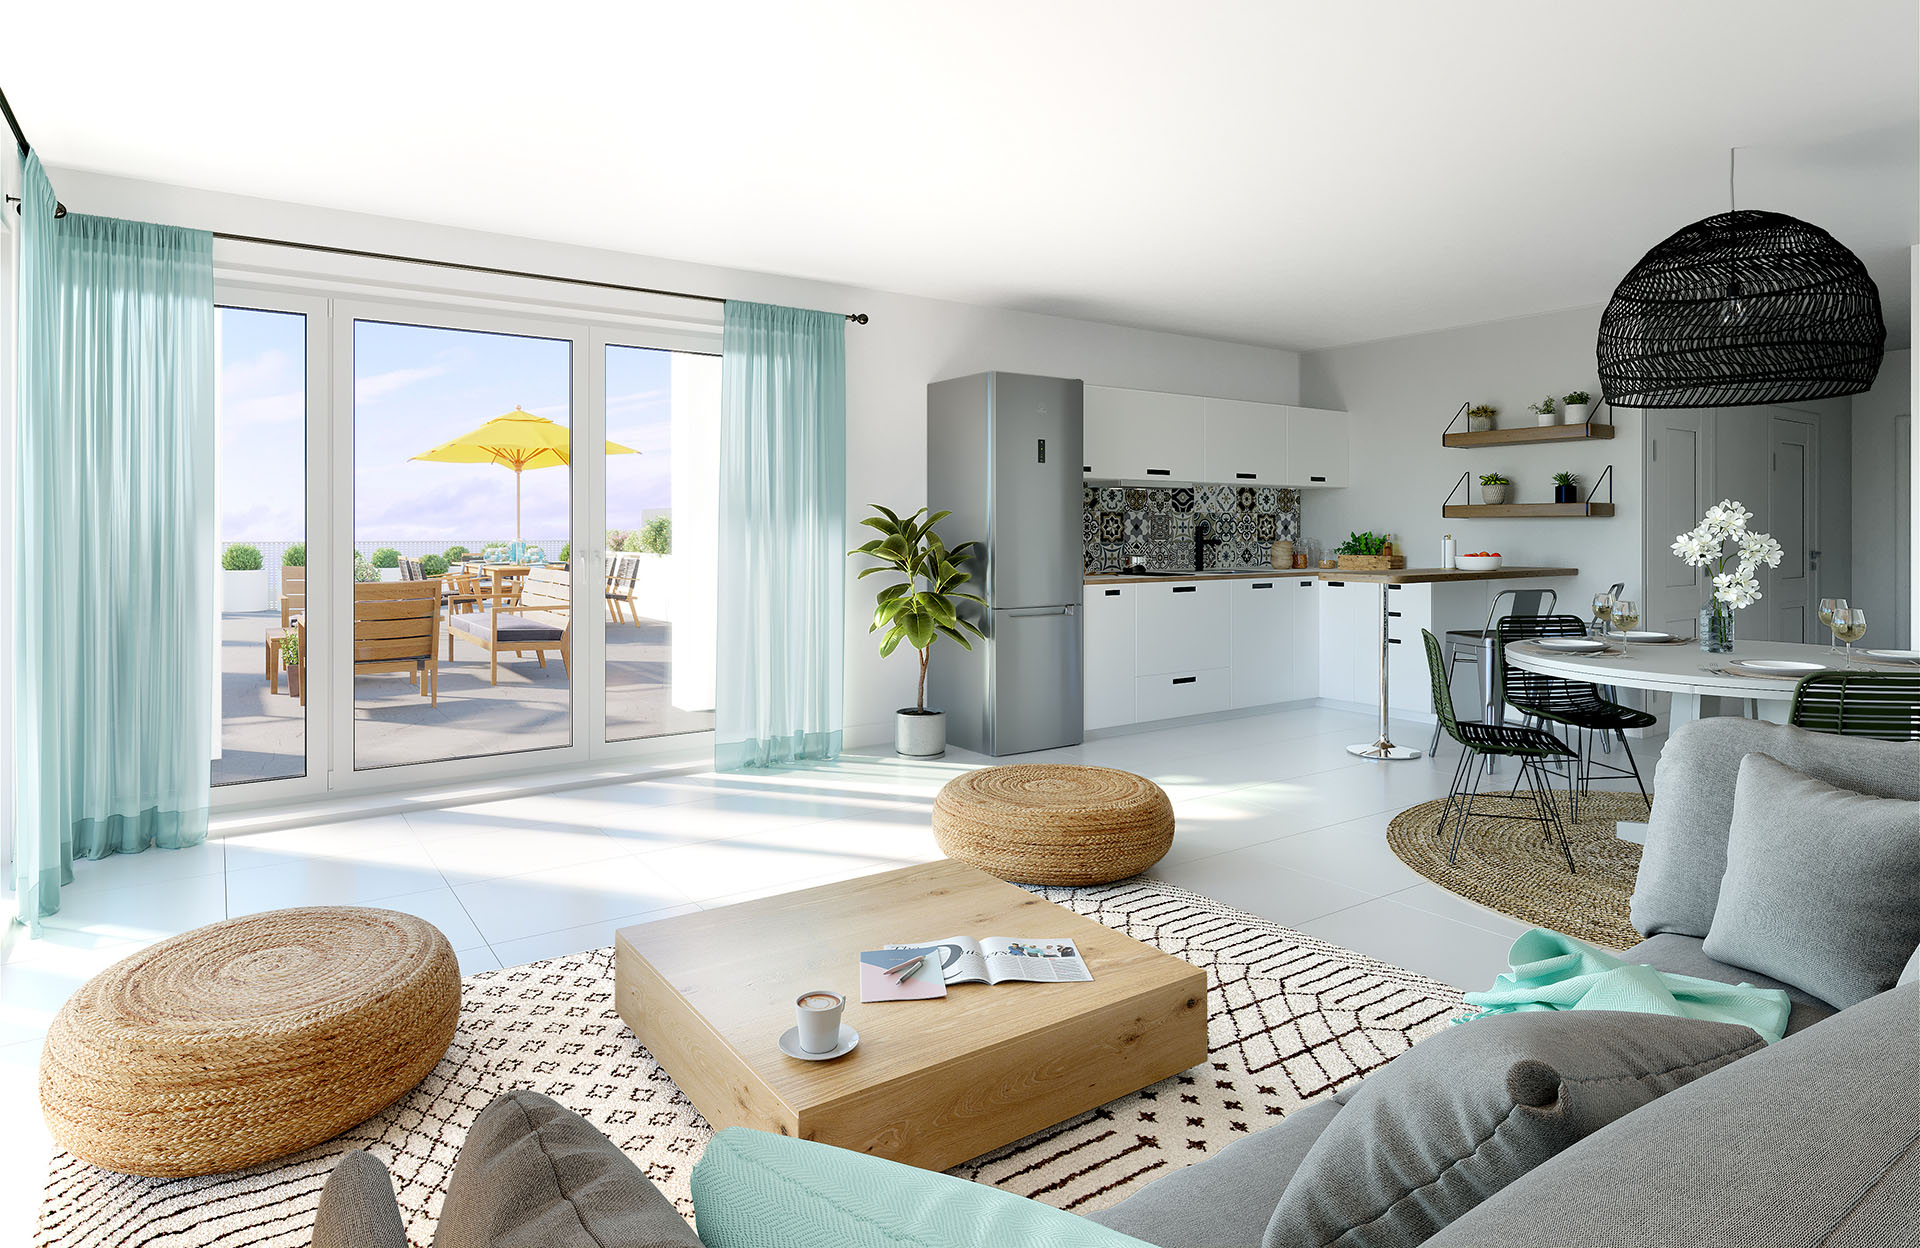 3D image of the interior of a modern apartment